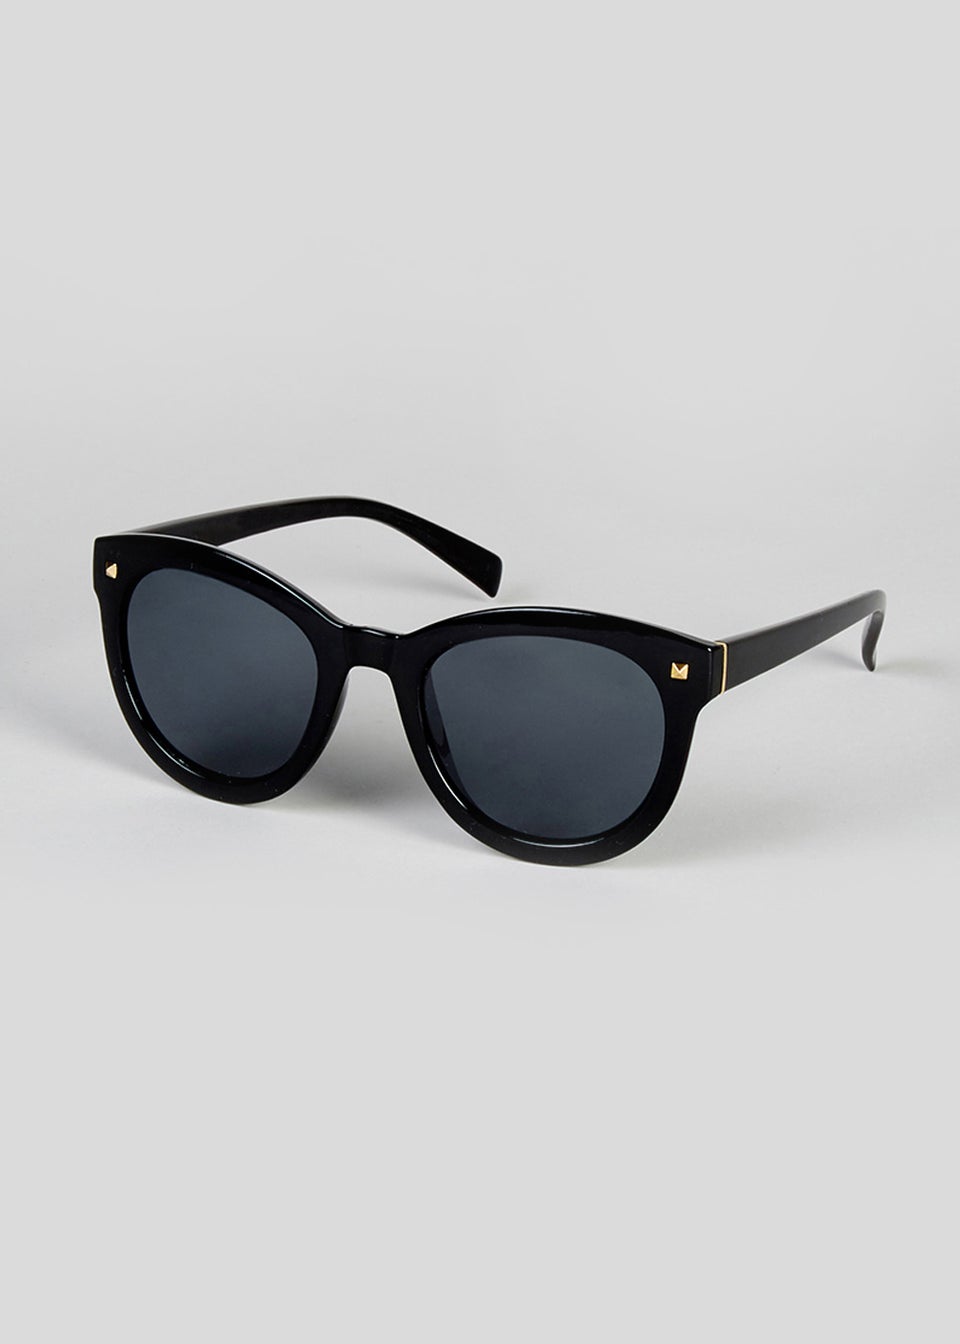 Foster Grant Chunky Sunglasses